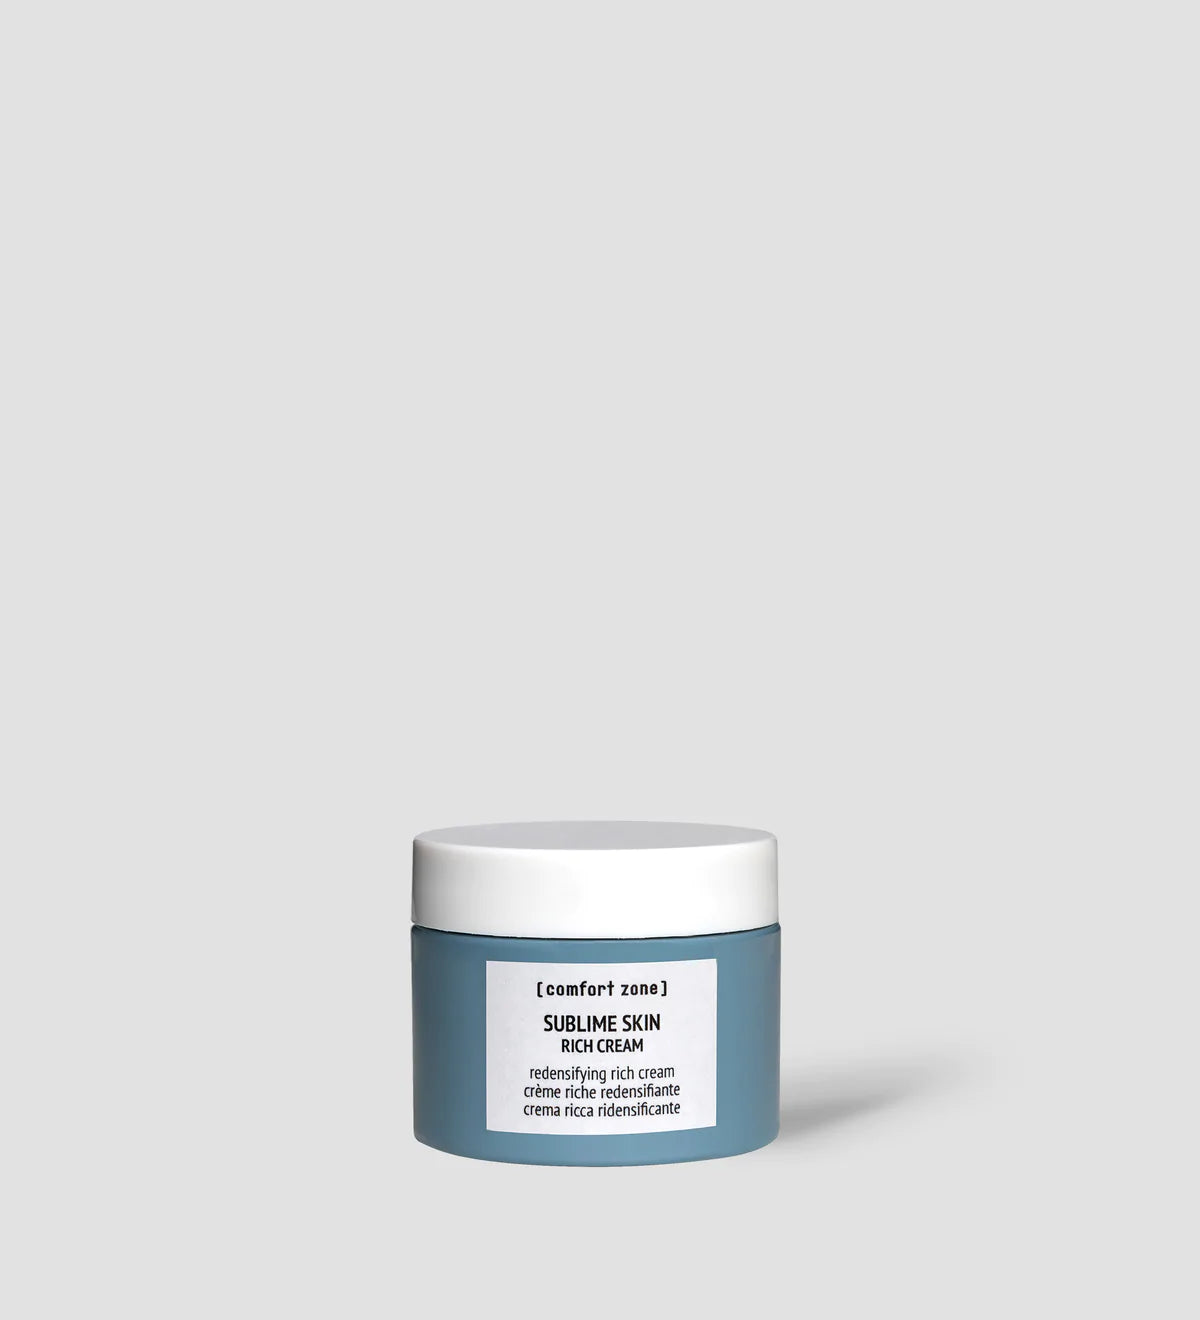 Sublime Skin Redensifying Rich Cream